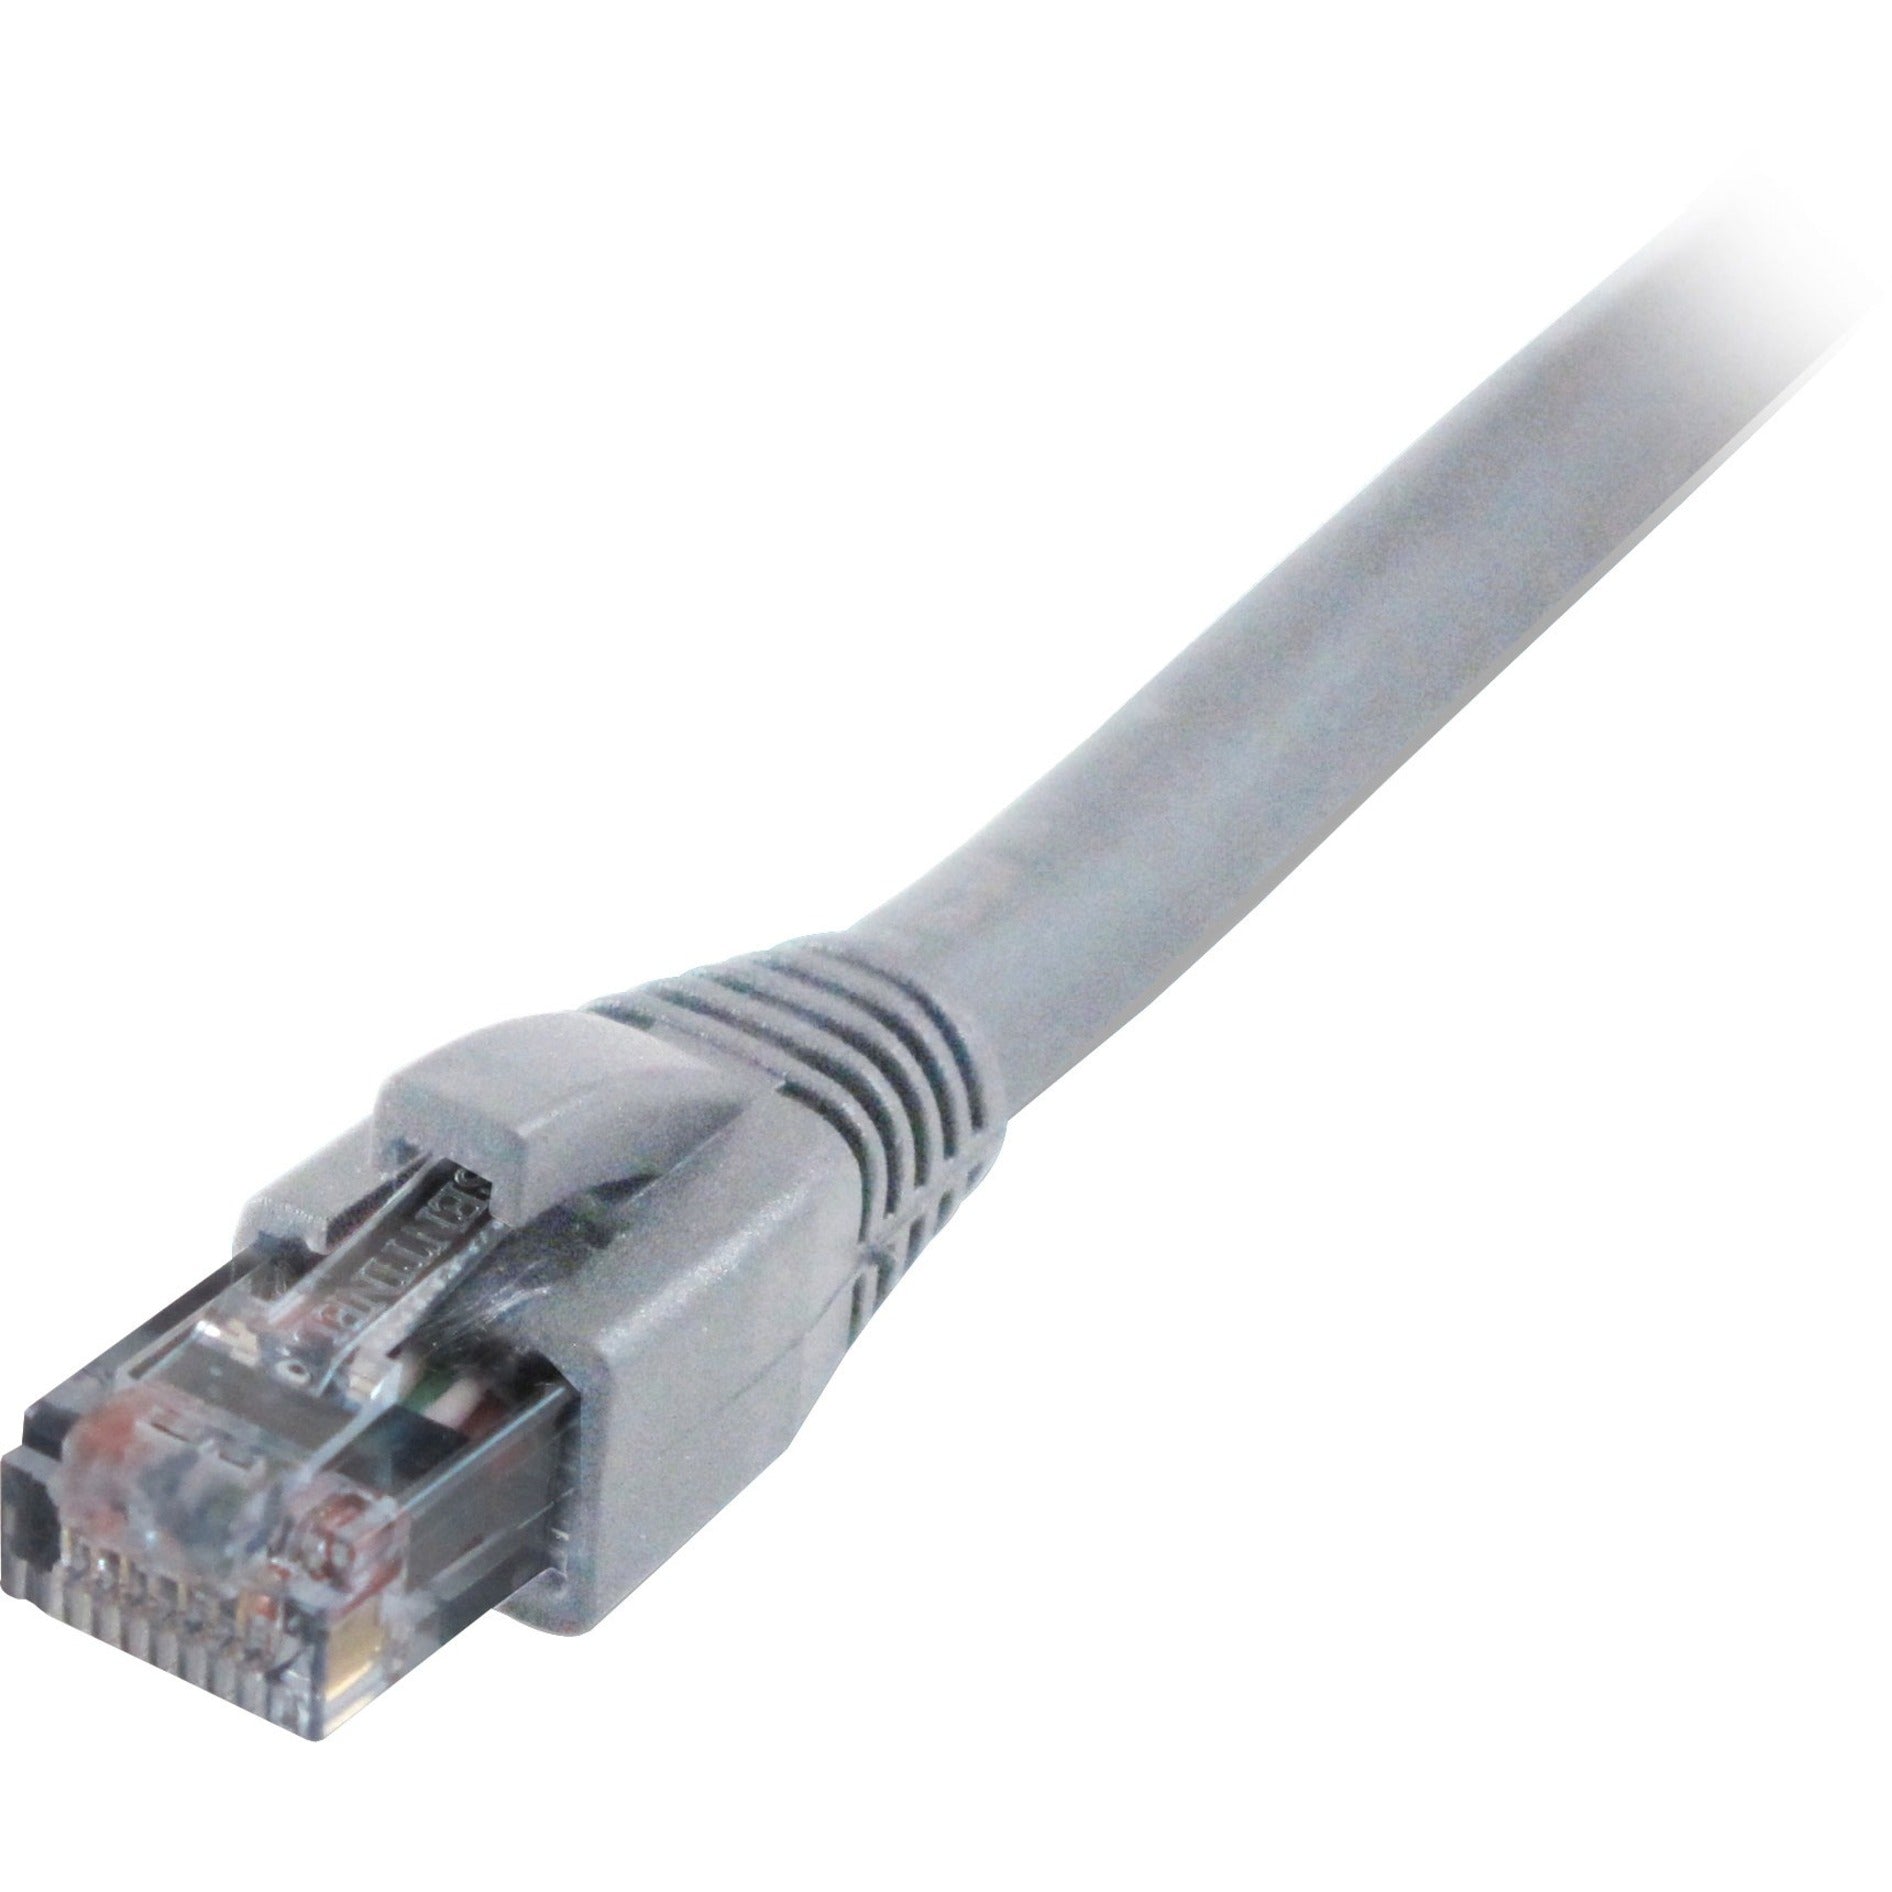 Comprehensive CAT6-50GRY Cat6 550 Mhz Snagless Patch Cable 50ft Gray, Molded, Strain Relief, 1 Gbit/s Data Transfer Rate